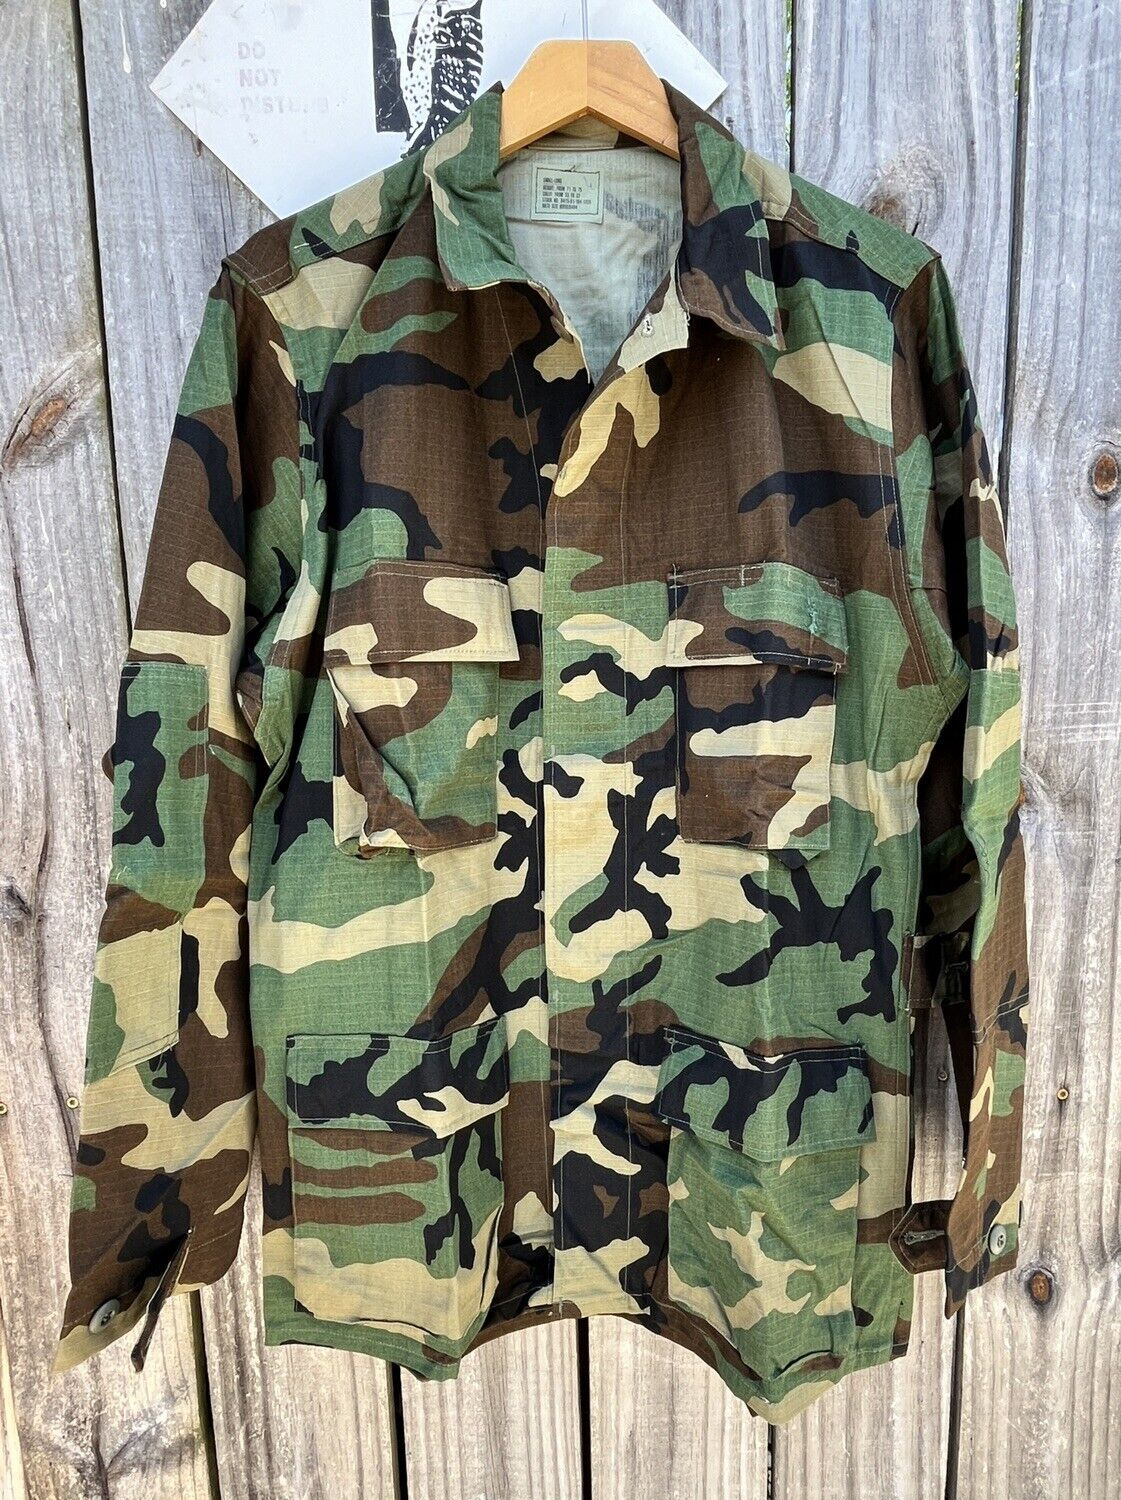 M81 Woodland BDU Shirt Ripstop Small Long 1985 Early Style Unissued 100% Cotton